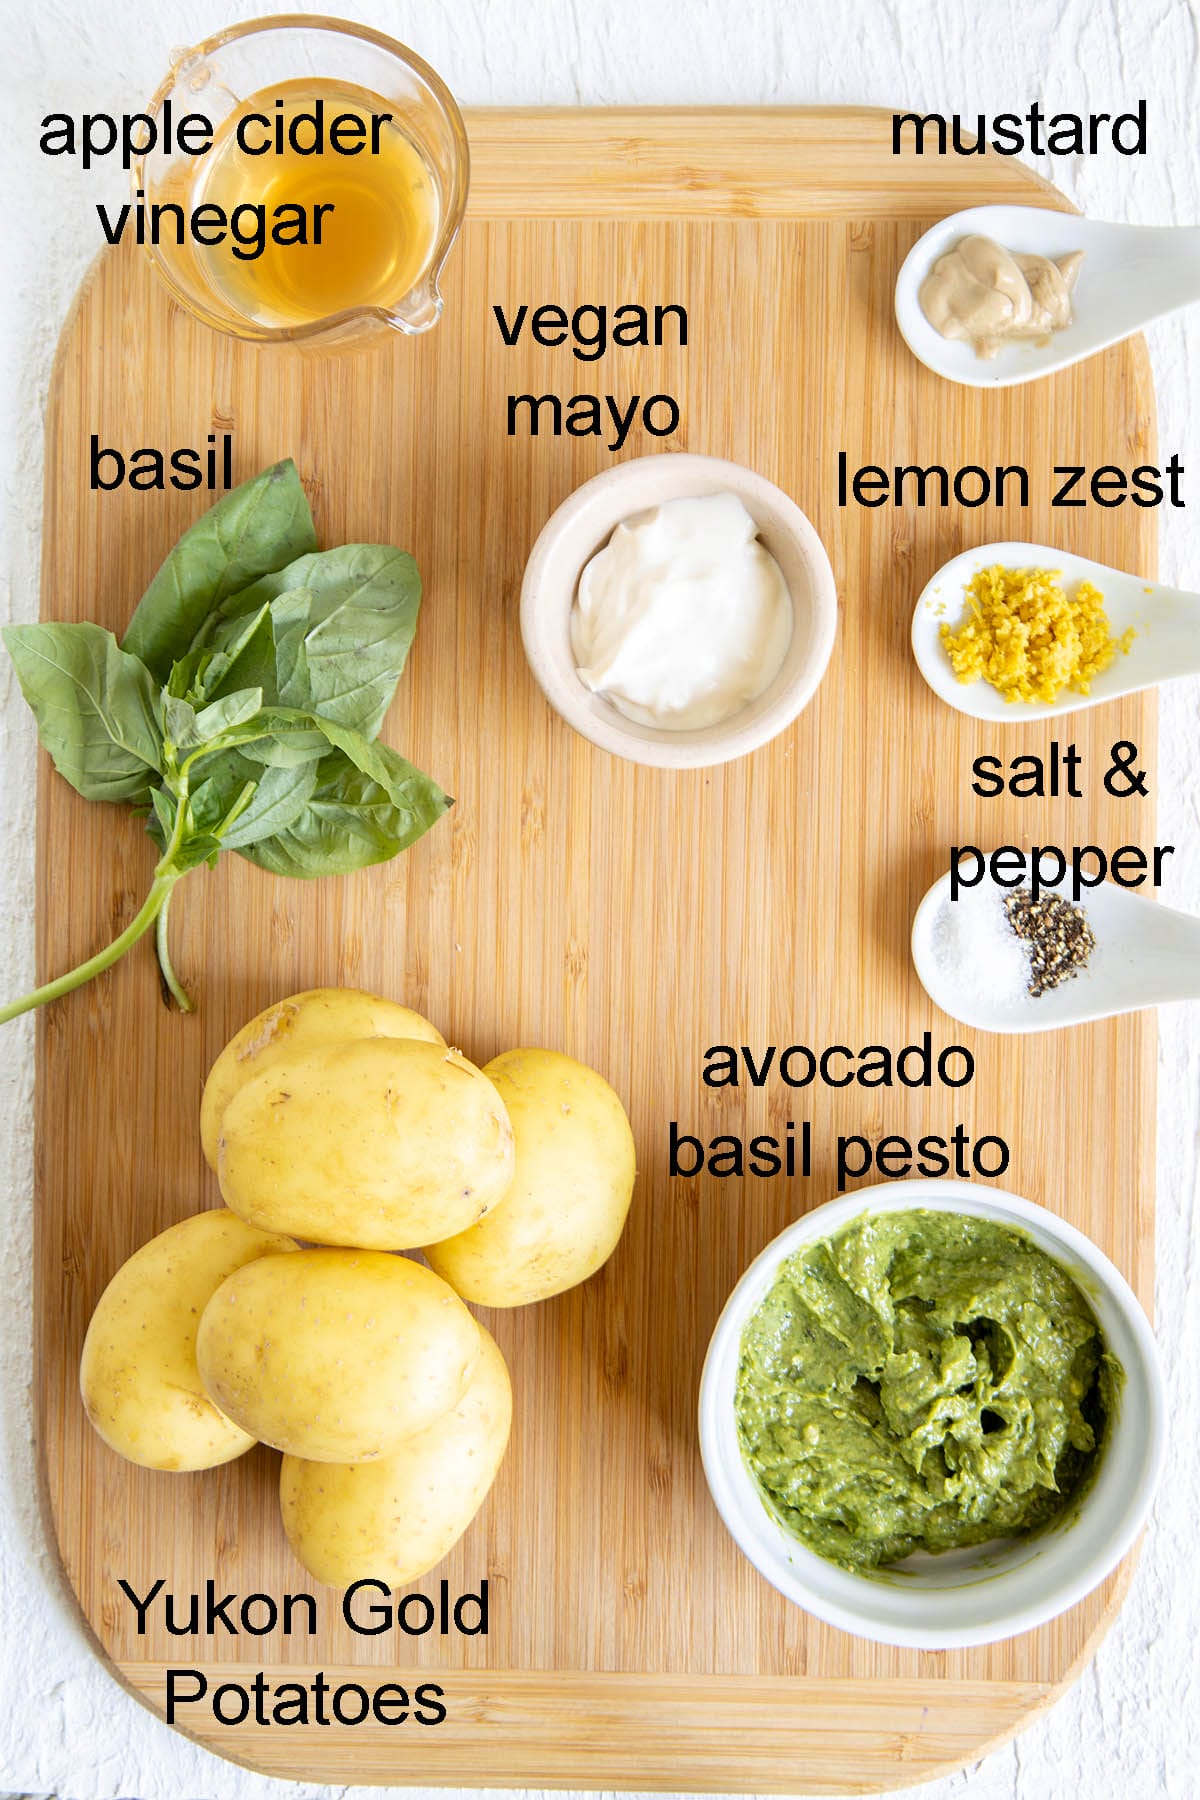 Avocado pesto potato salad ingredients on a cutting board with labels.